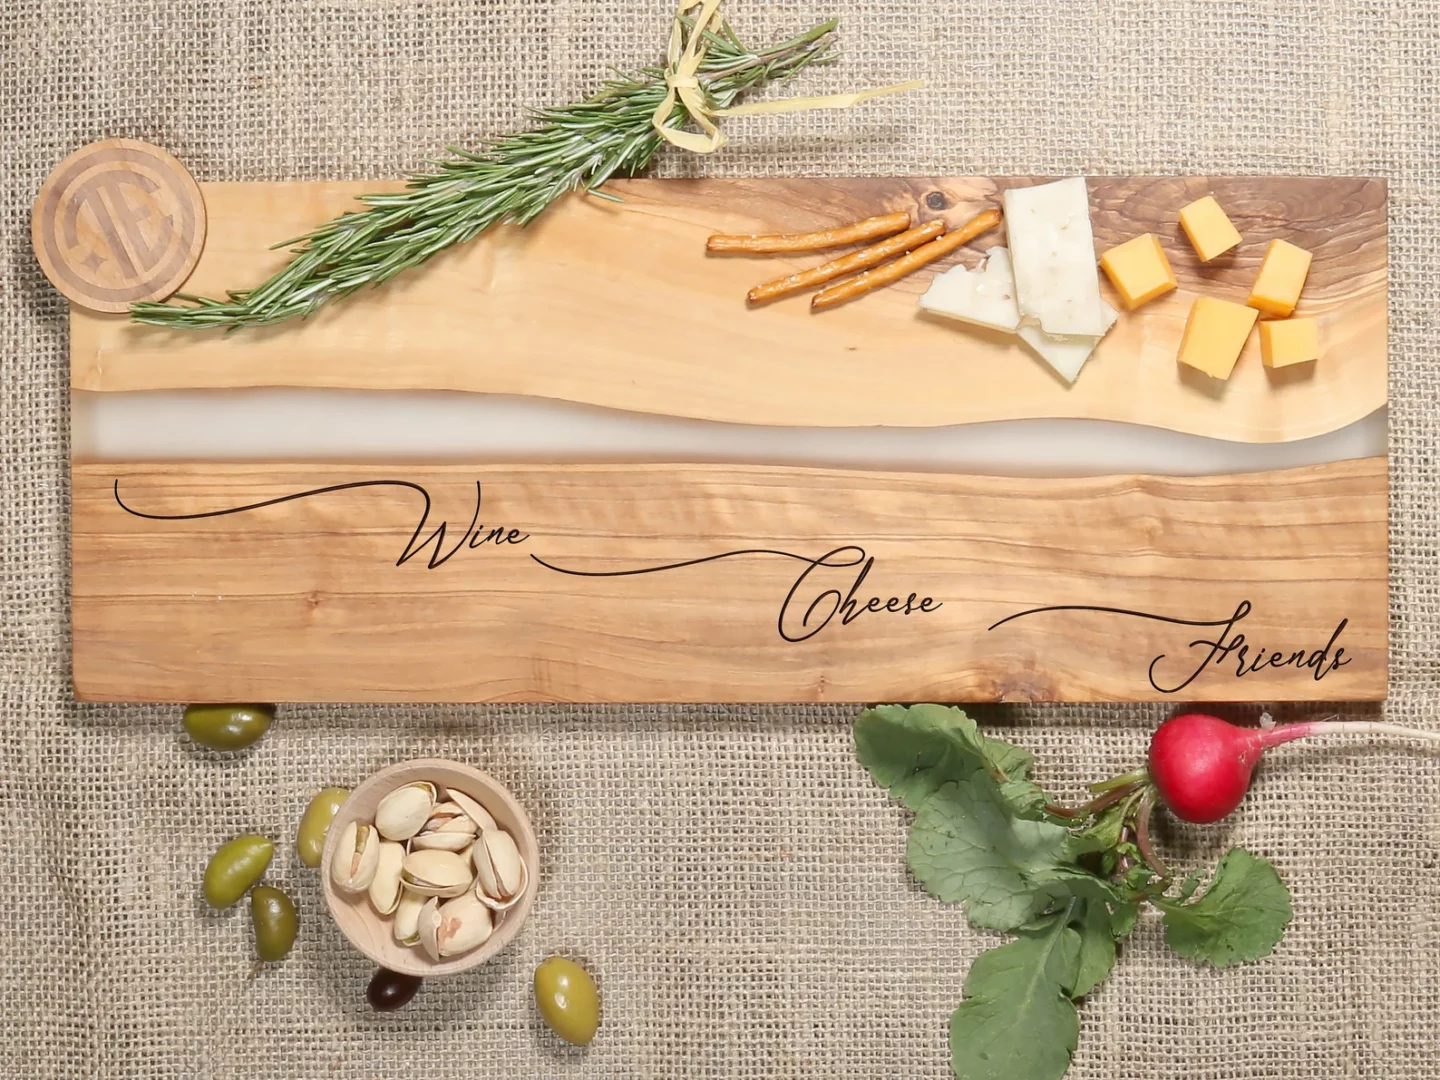 Personalized wood and resin charcuterie board from Etsy